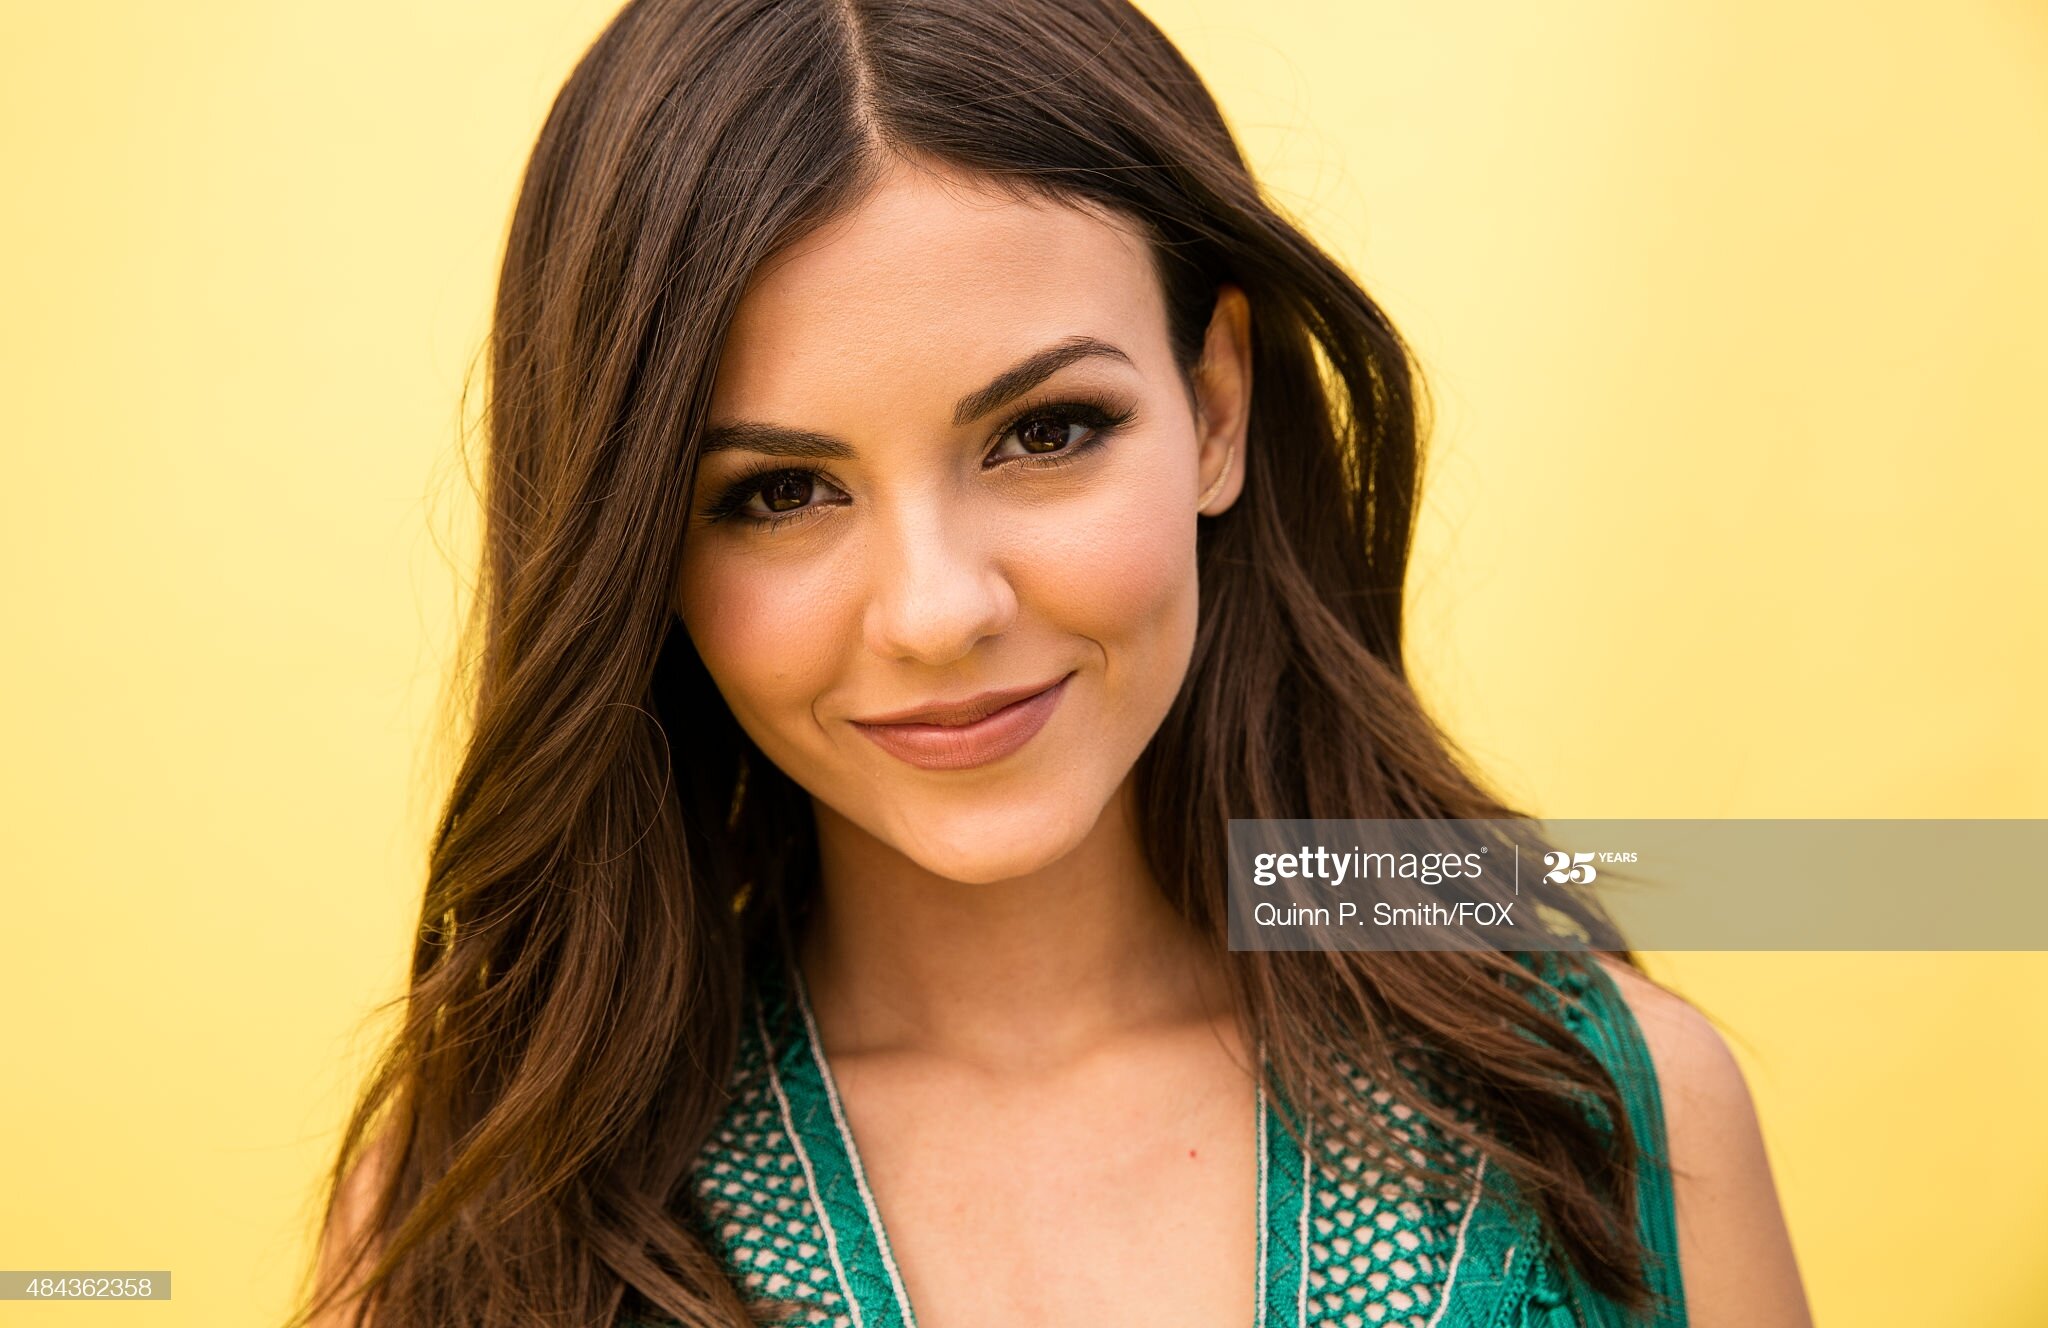 gettyimages-484362358-2048x2048.jpg